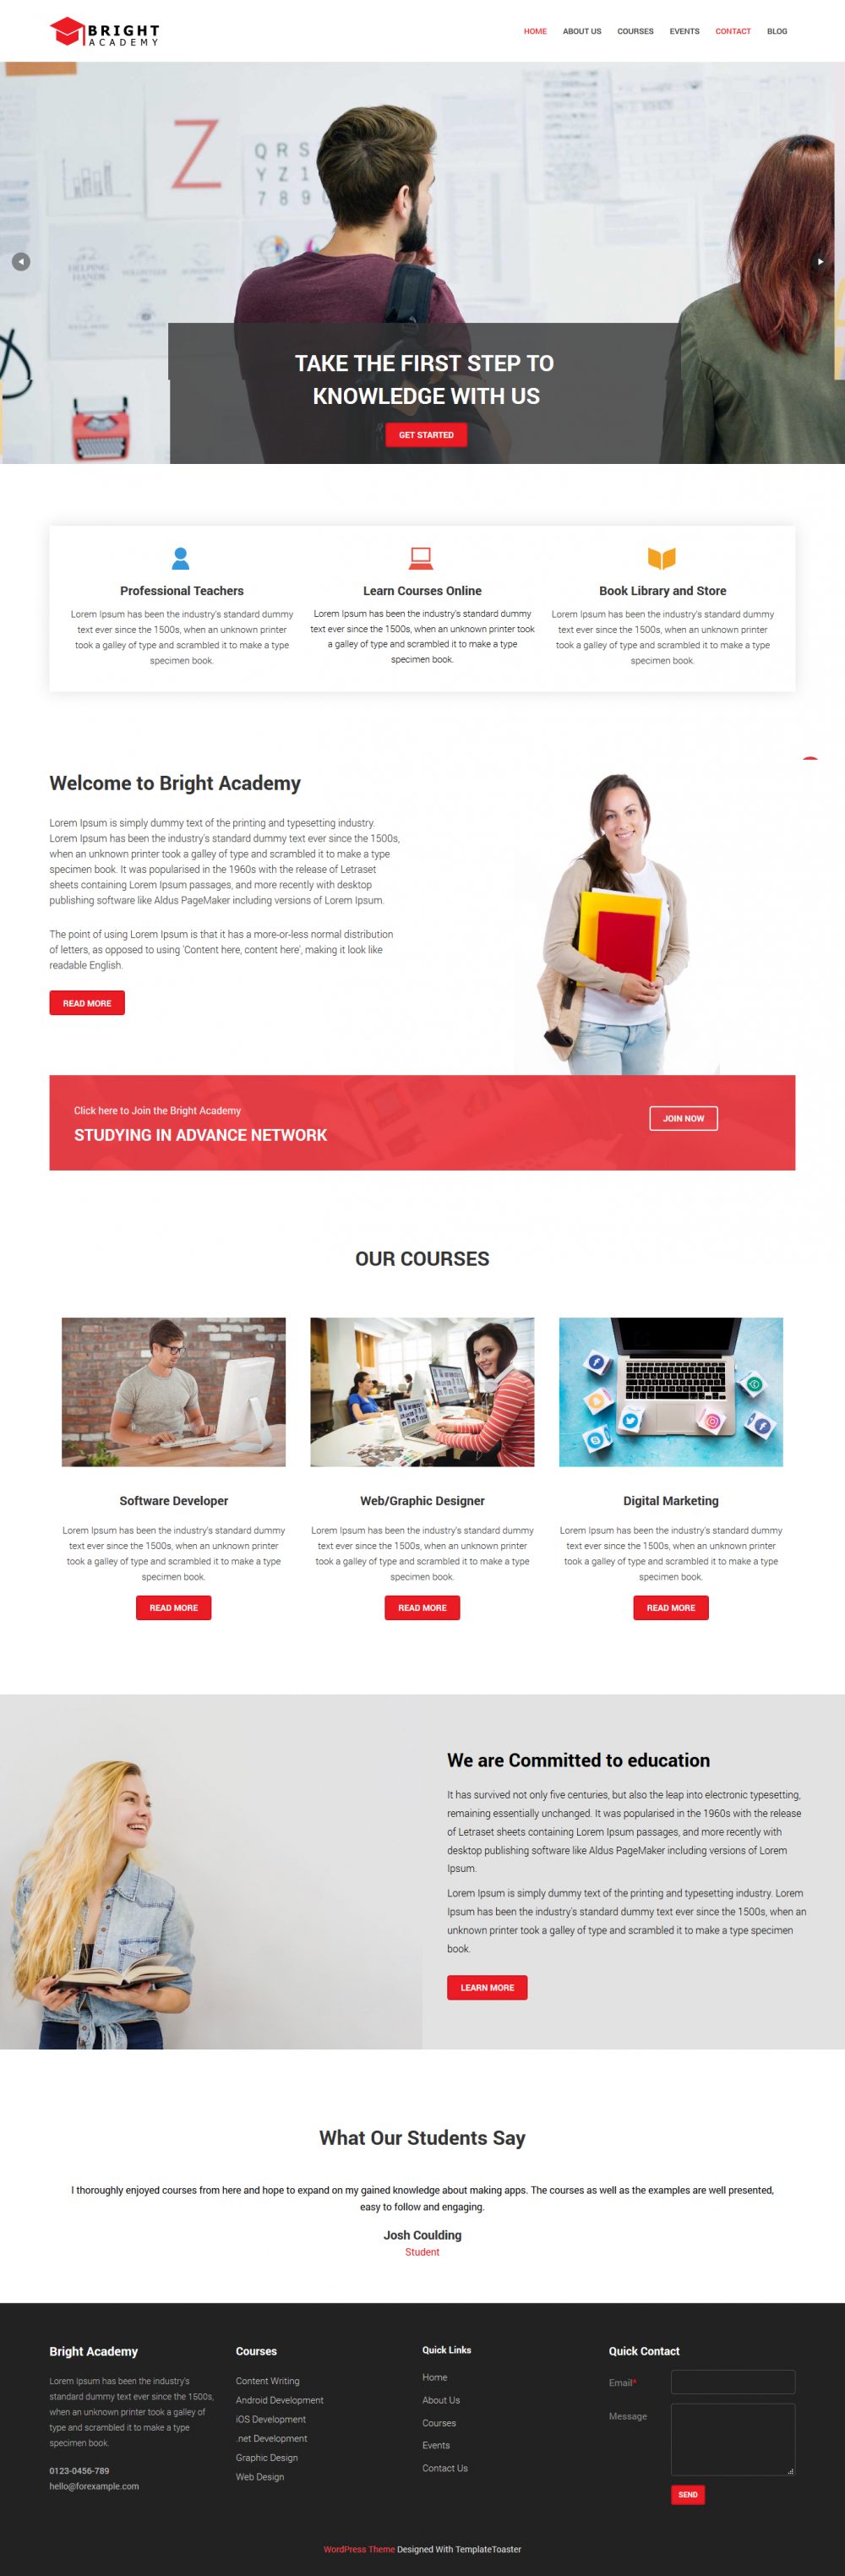 Bright Academy Learning Academy blogger template